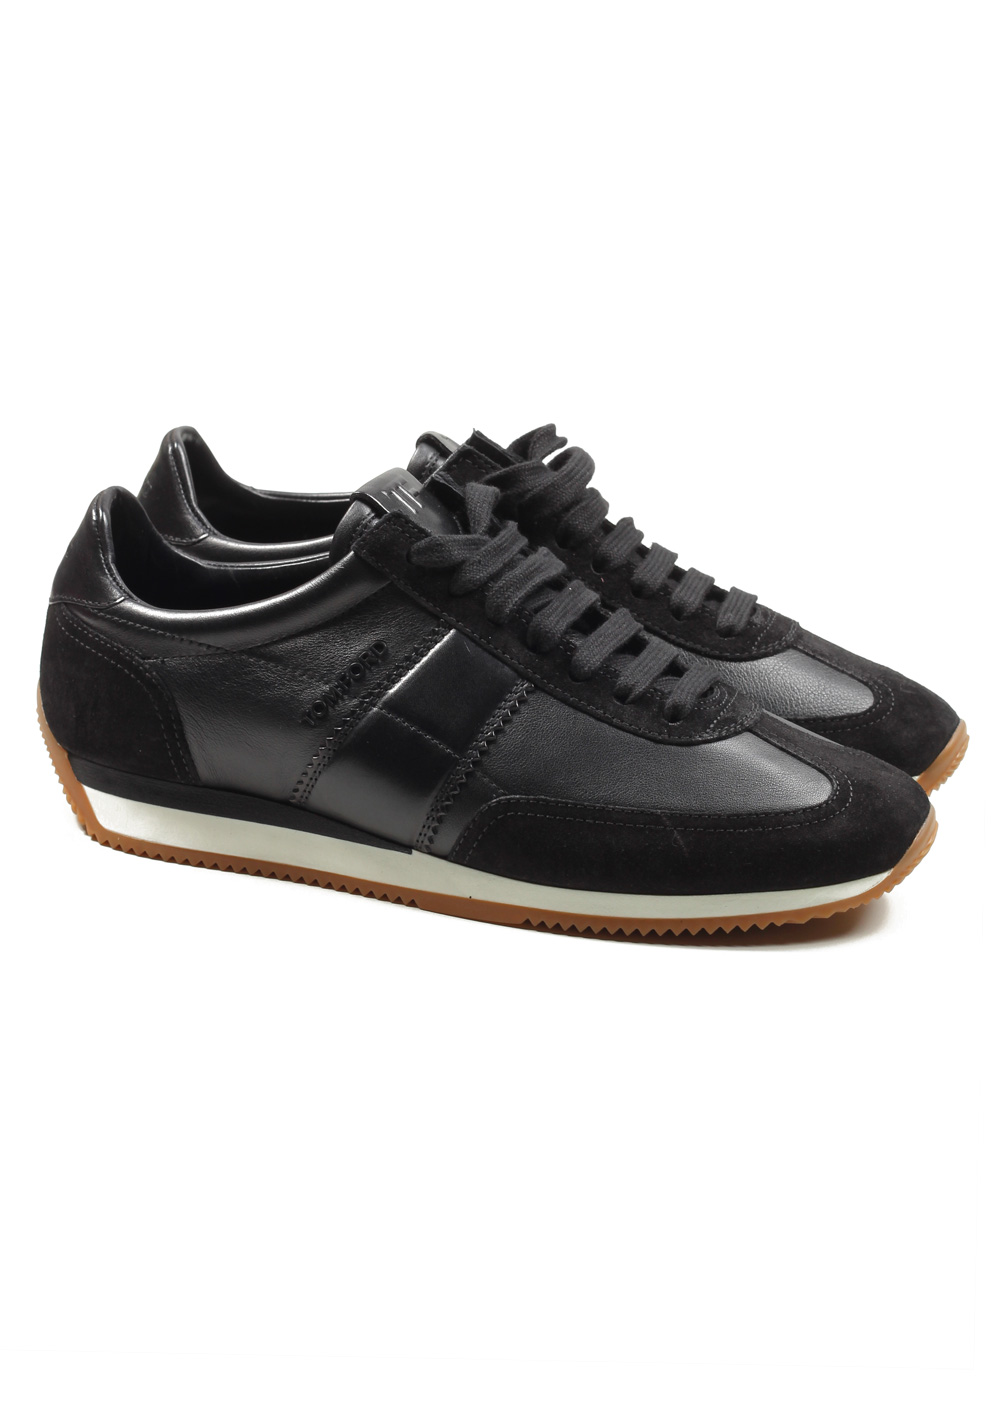 TOM FORD Orford Colorblock Suede Black Trainer Sneaker Shoes Size 9 Uk / 10 U.S. | Costume Limité